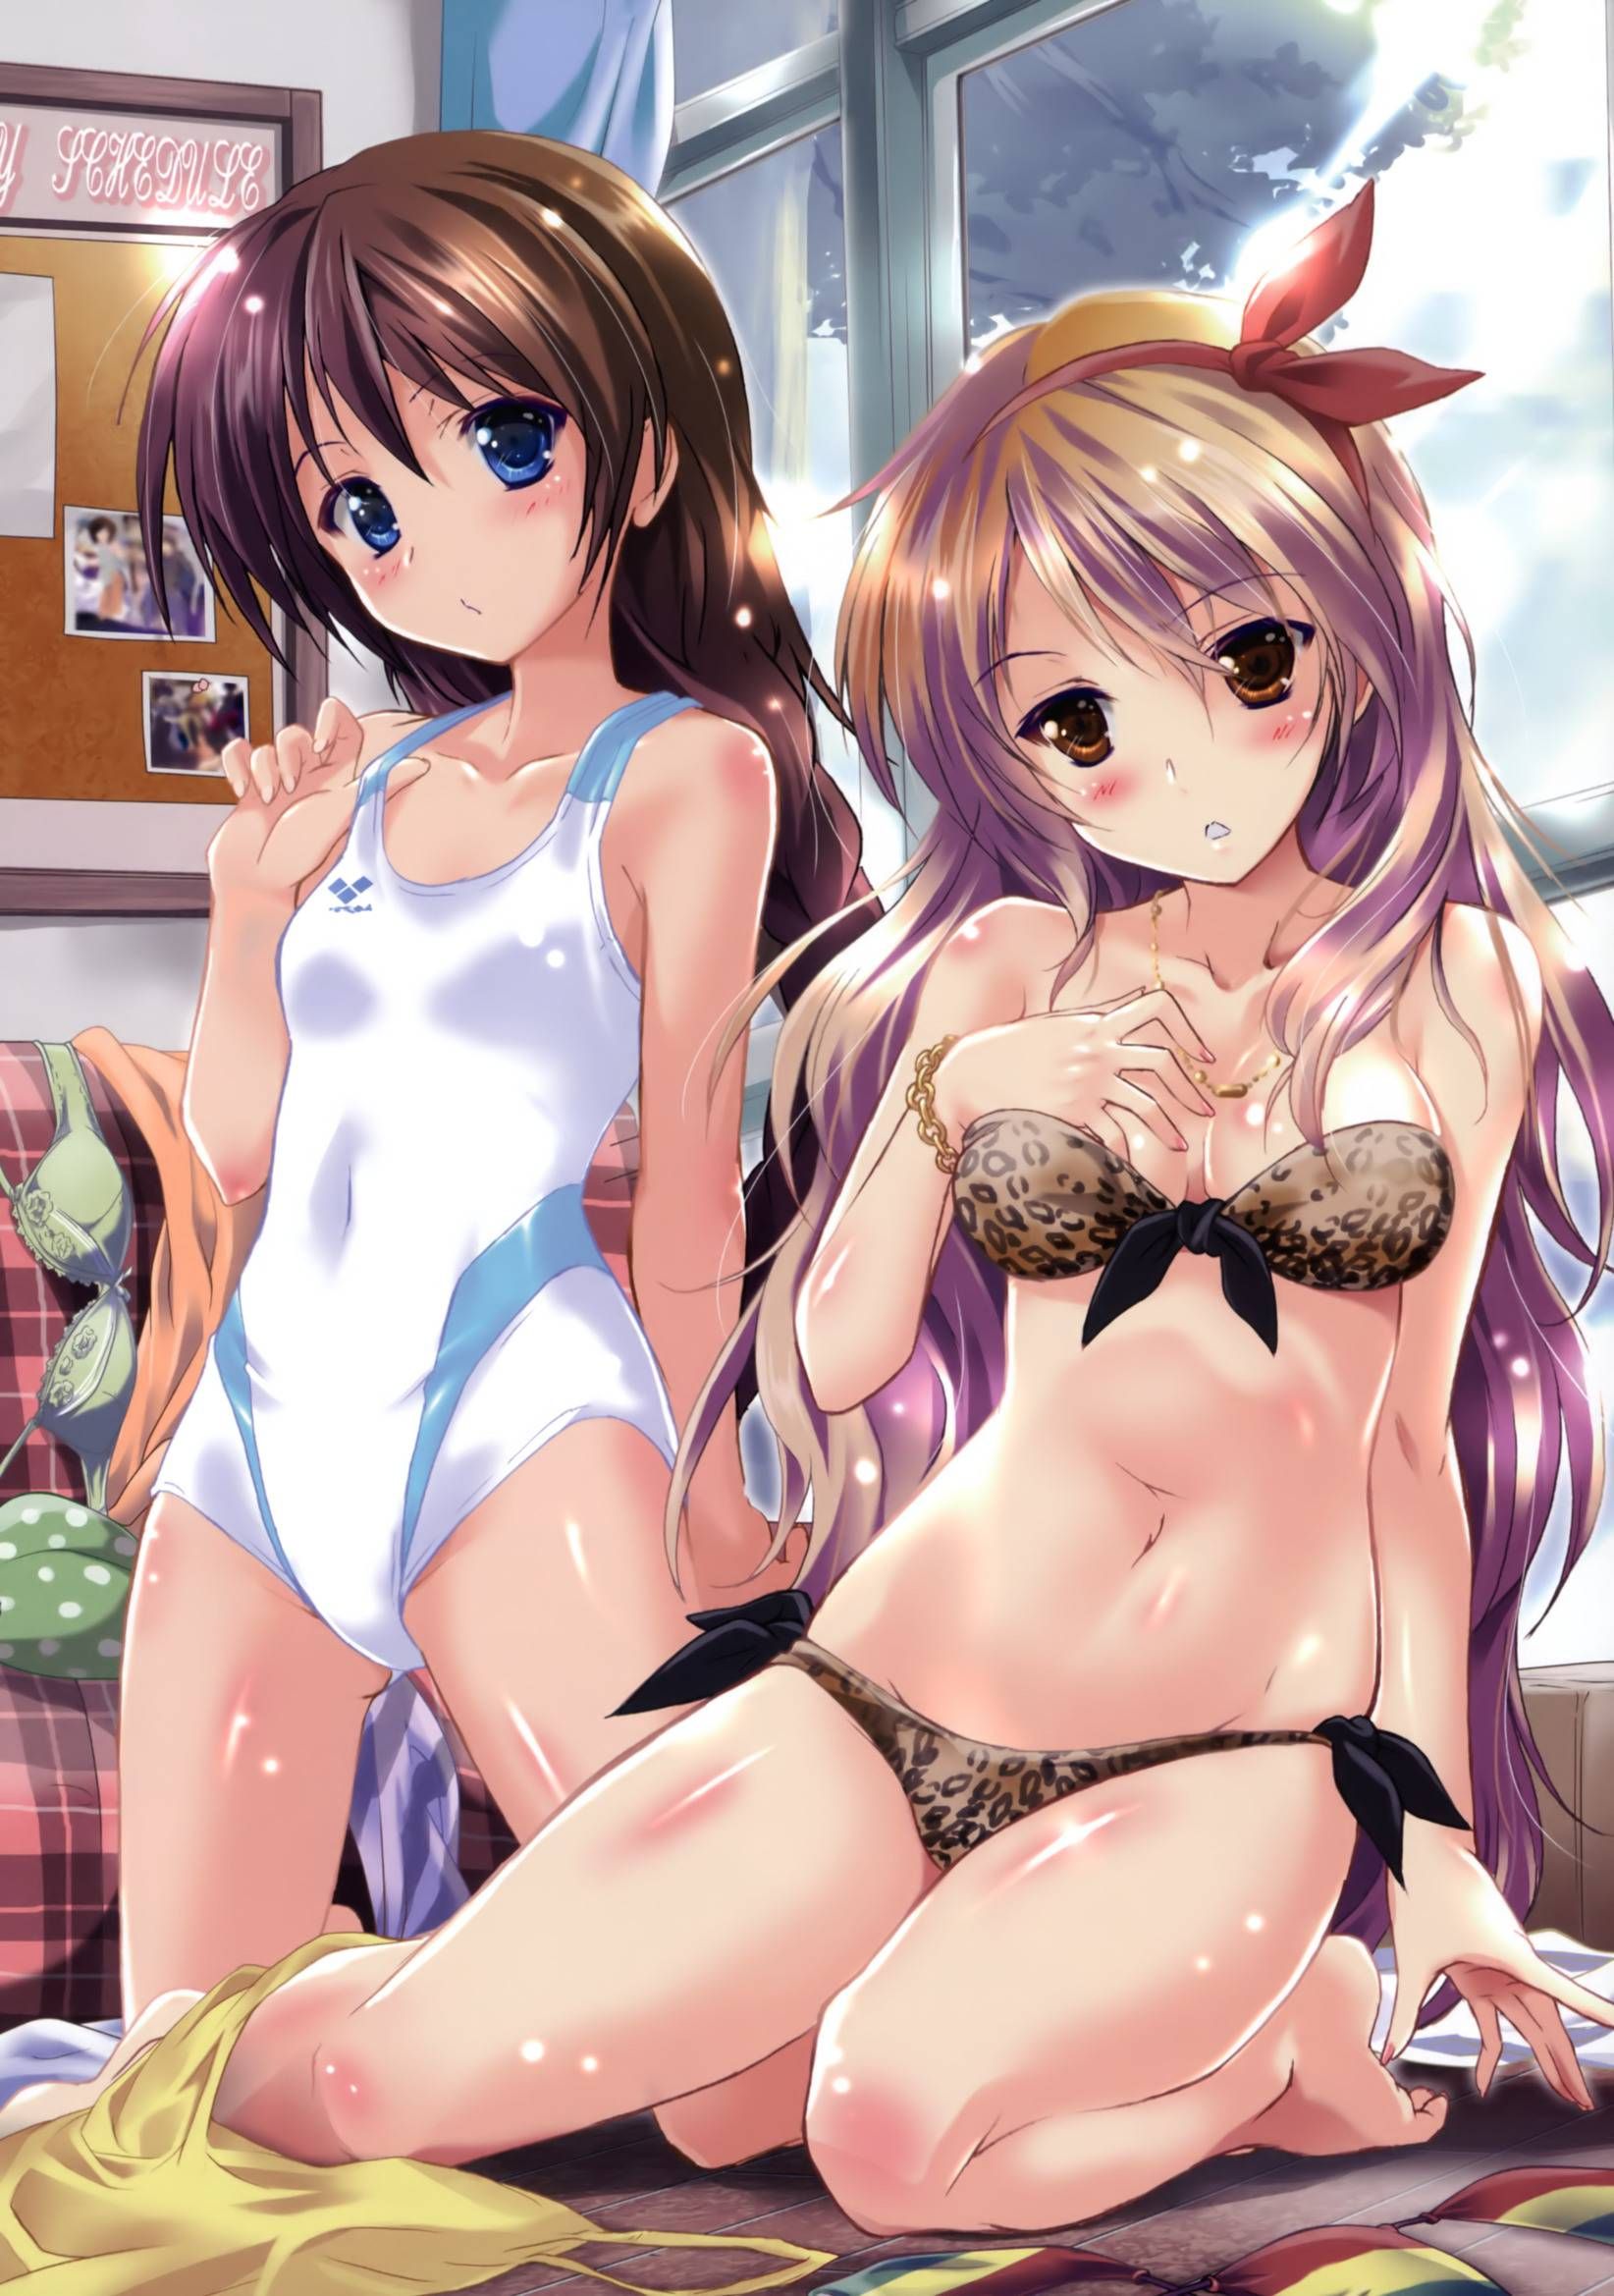 Swimsuit girl cloth area too little!!! Take a picture please 10